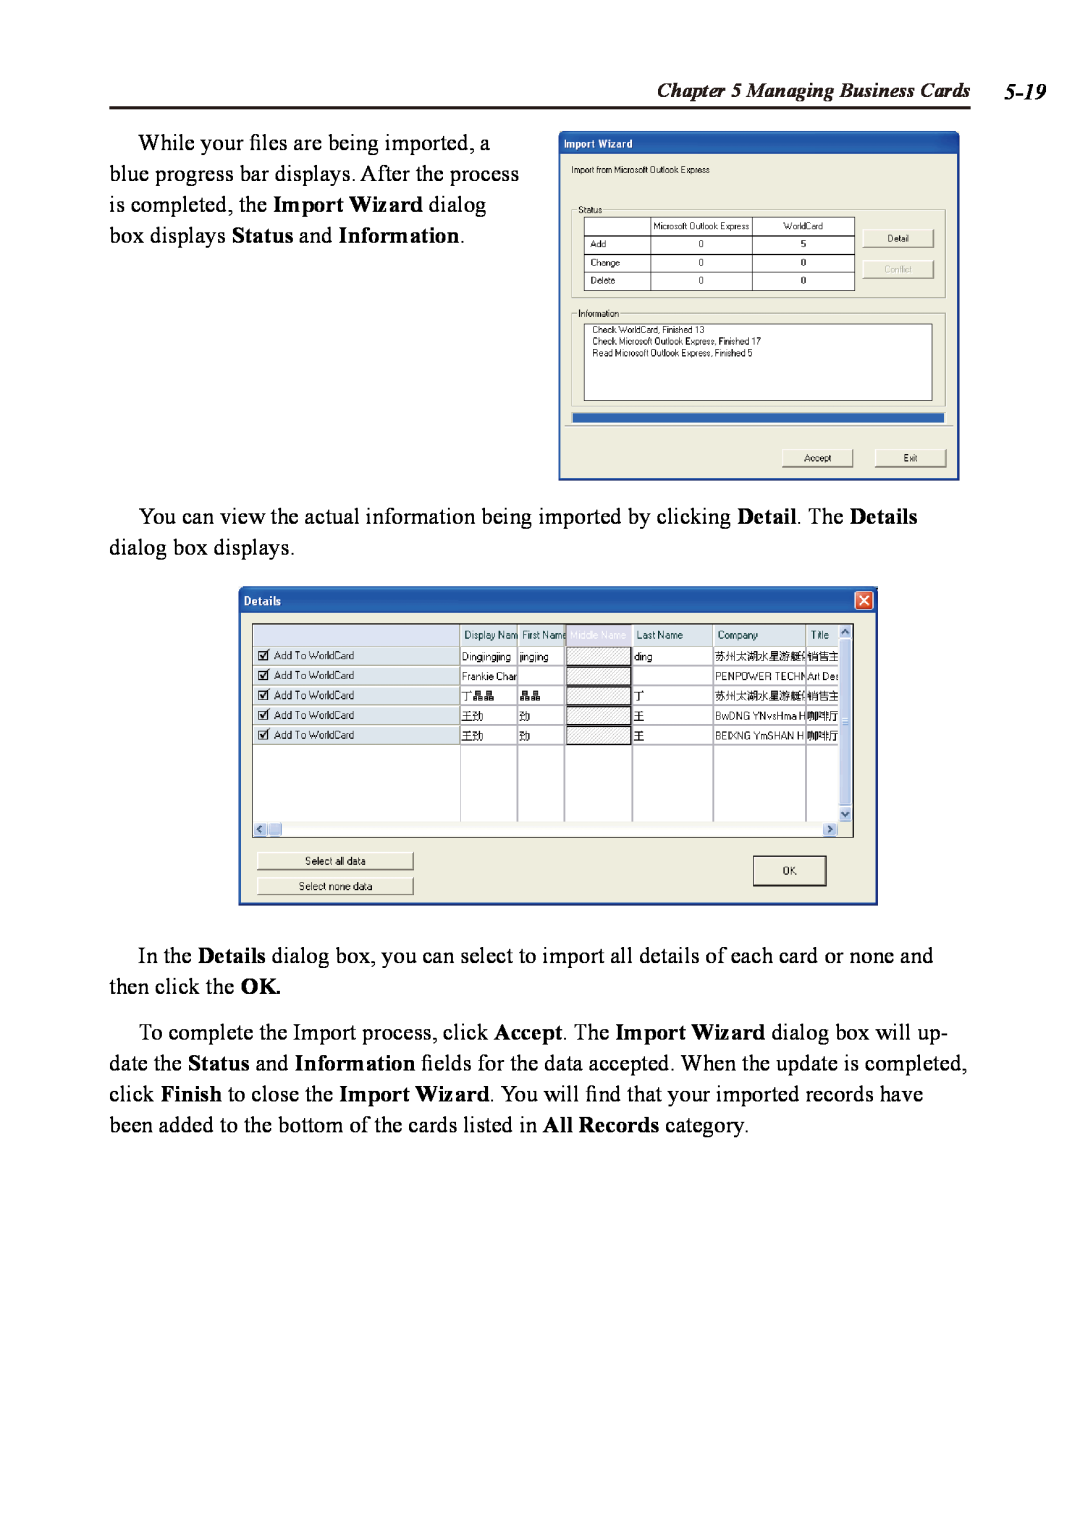 Penpower duet 2 user manual 5-19, While your files are being imported, a 